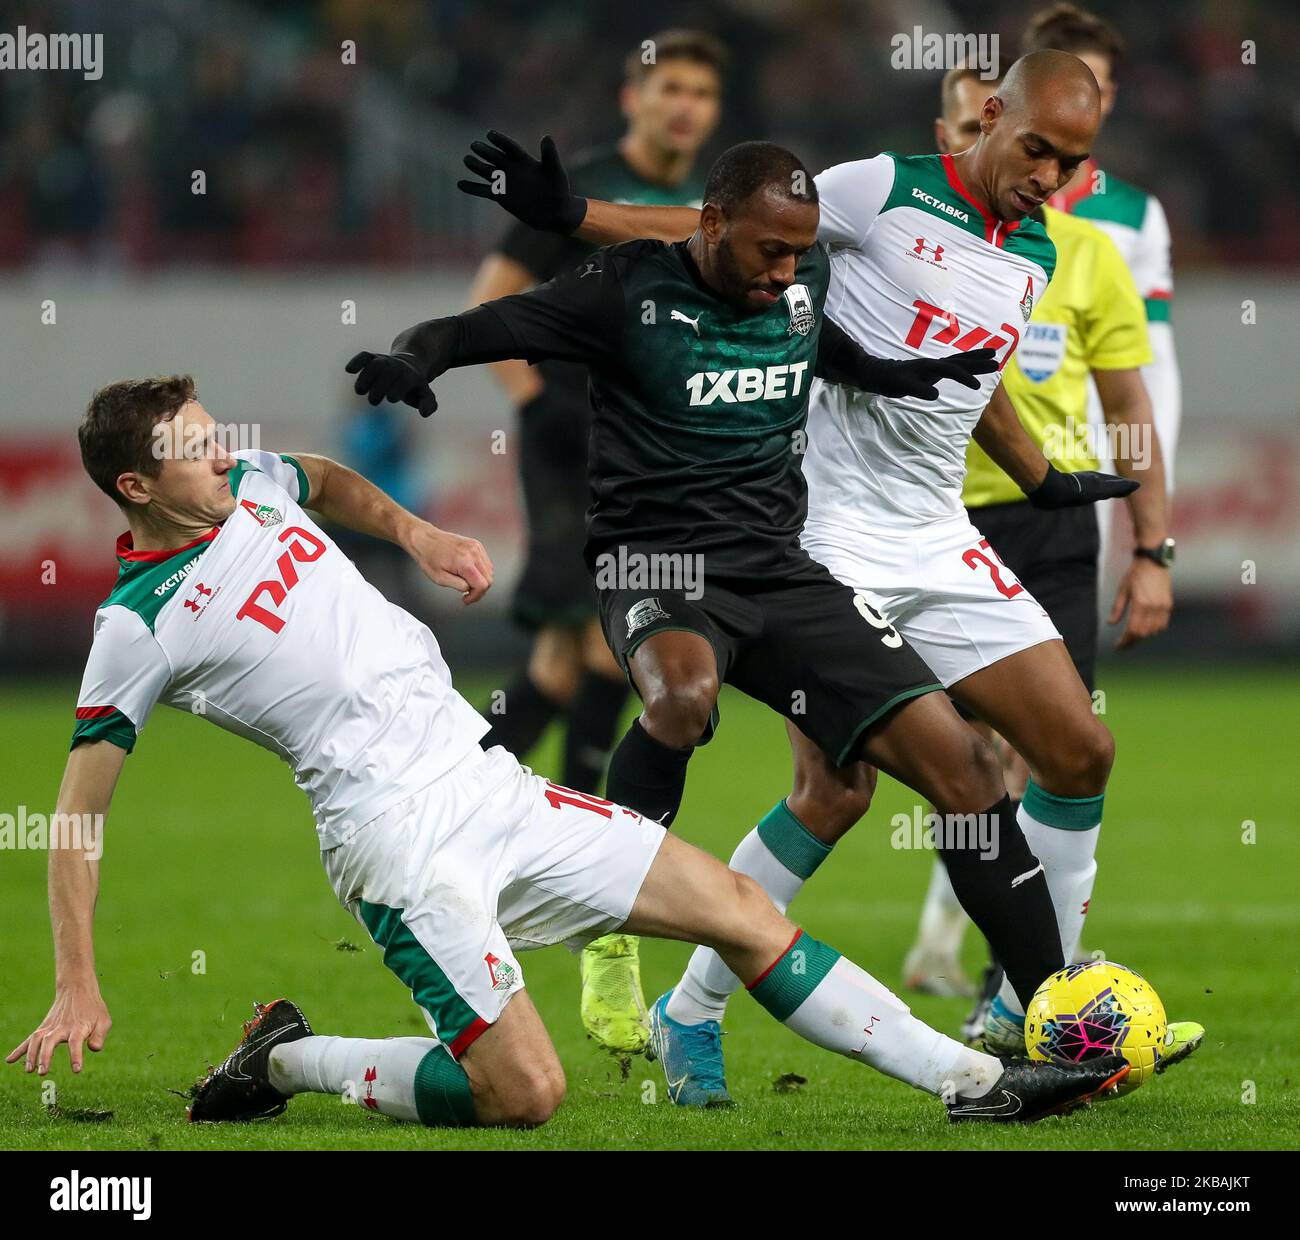 Aleksandr Kolomeytsev (L) and Murilo Cerqueira of FC Lokomotiv Moscow and Manuel Fernandes (C) of FC Krasnodar vie for the ball during the Russian Football League match between FC Lokomotiv Moscow and FC Krasnodar at RZD Arena on November 10, 2019, in Moscow, Russia. (Photo by Igor Russak/NurPhoto) Stock Photo